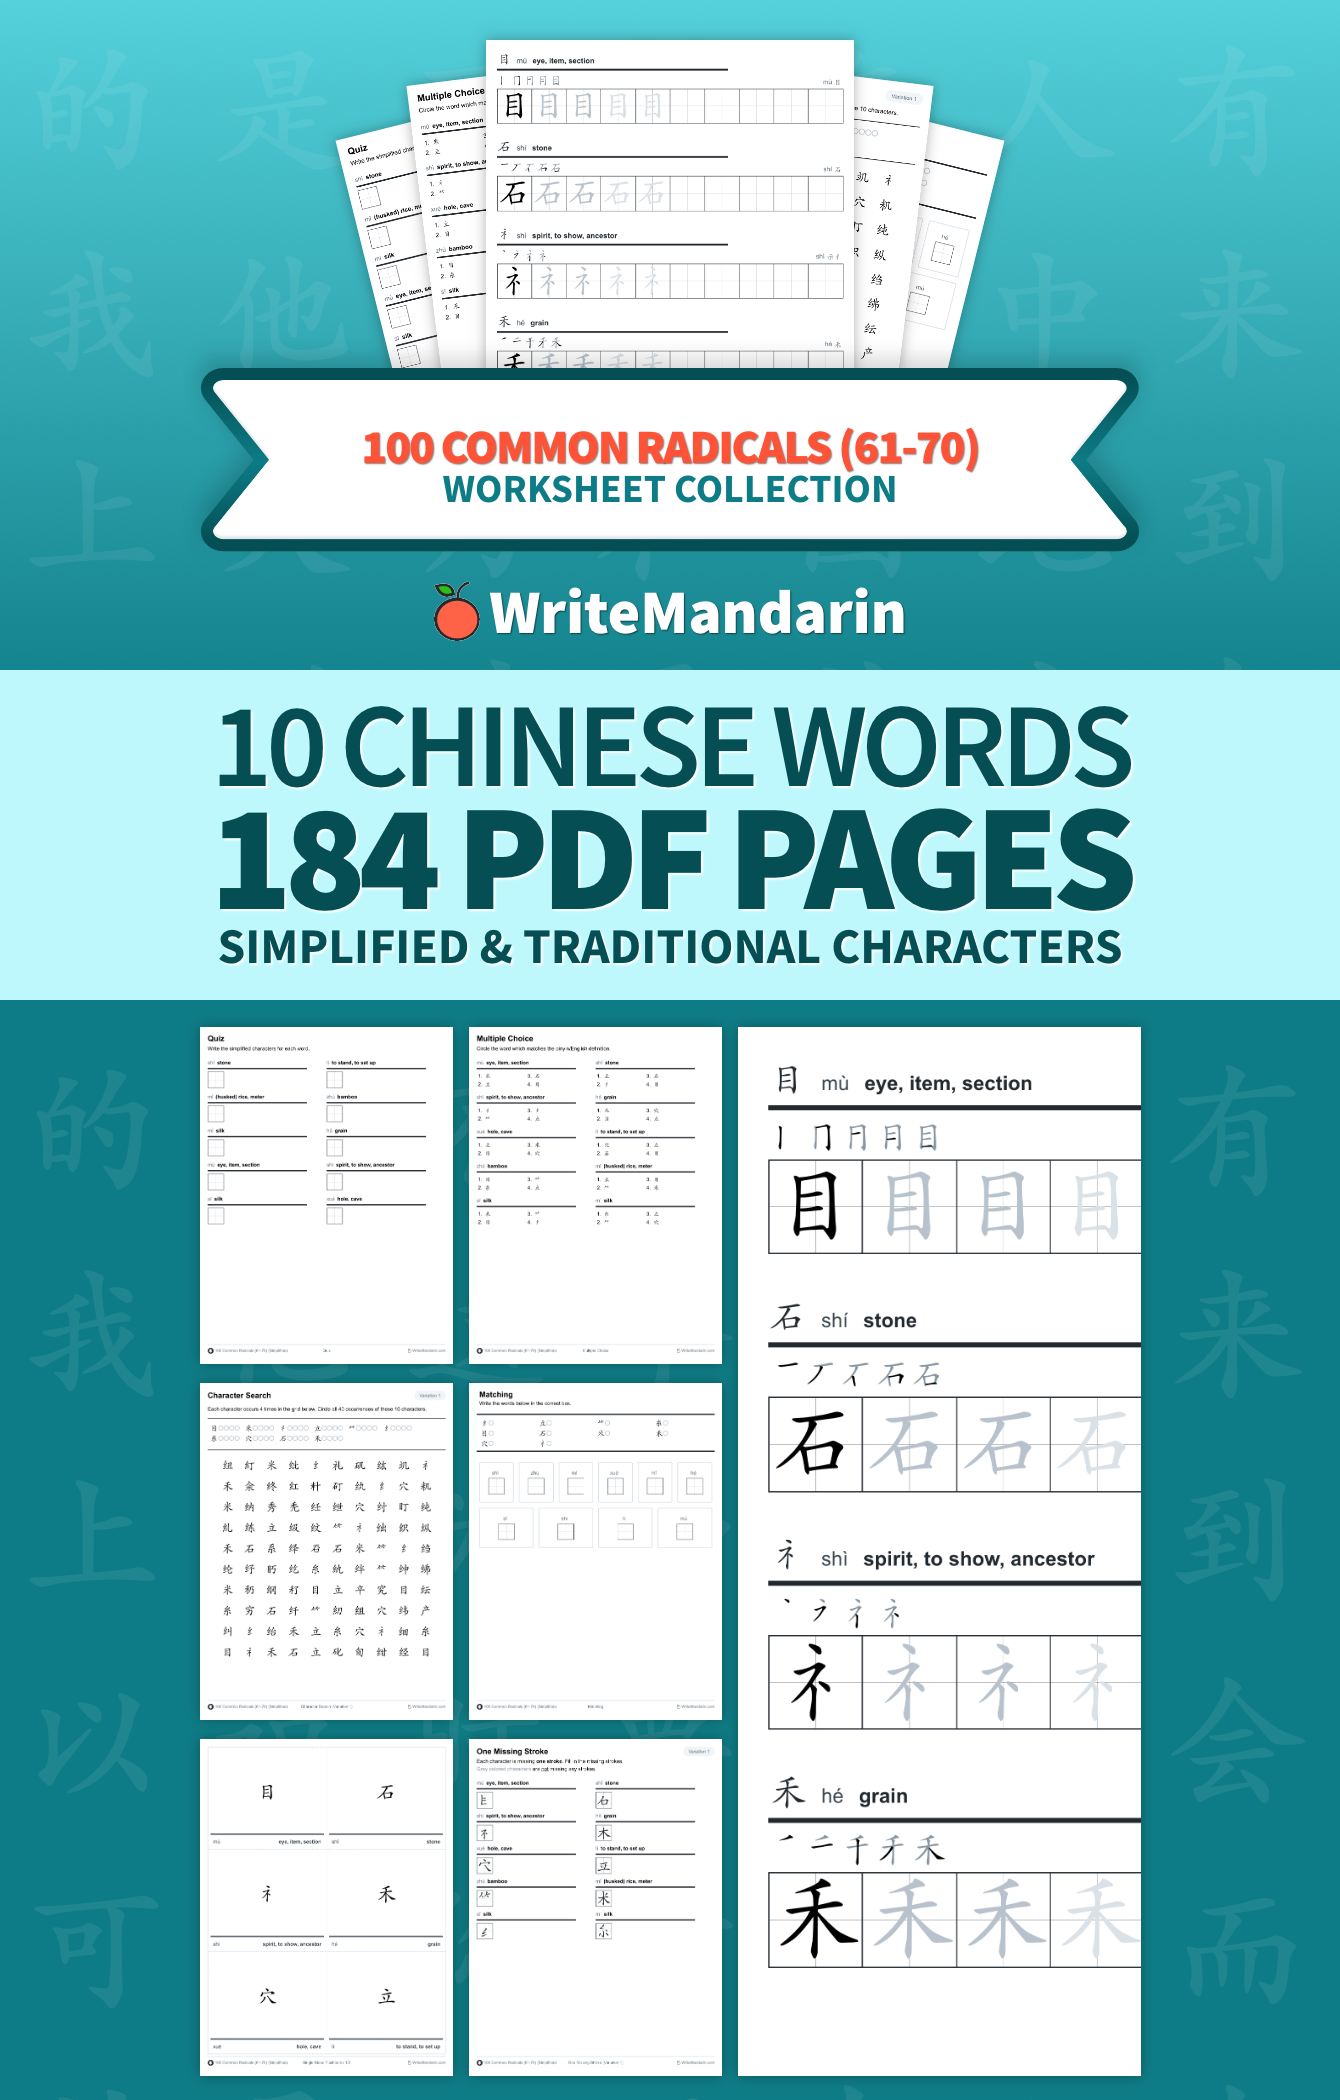 Preview image of 100 Common Radicals (61-70) worksheet collection